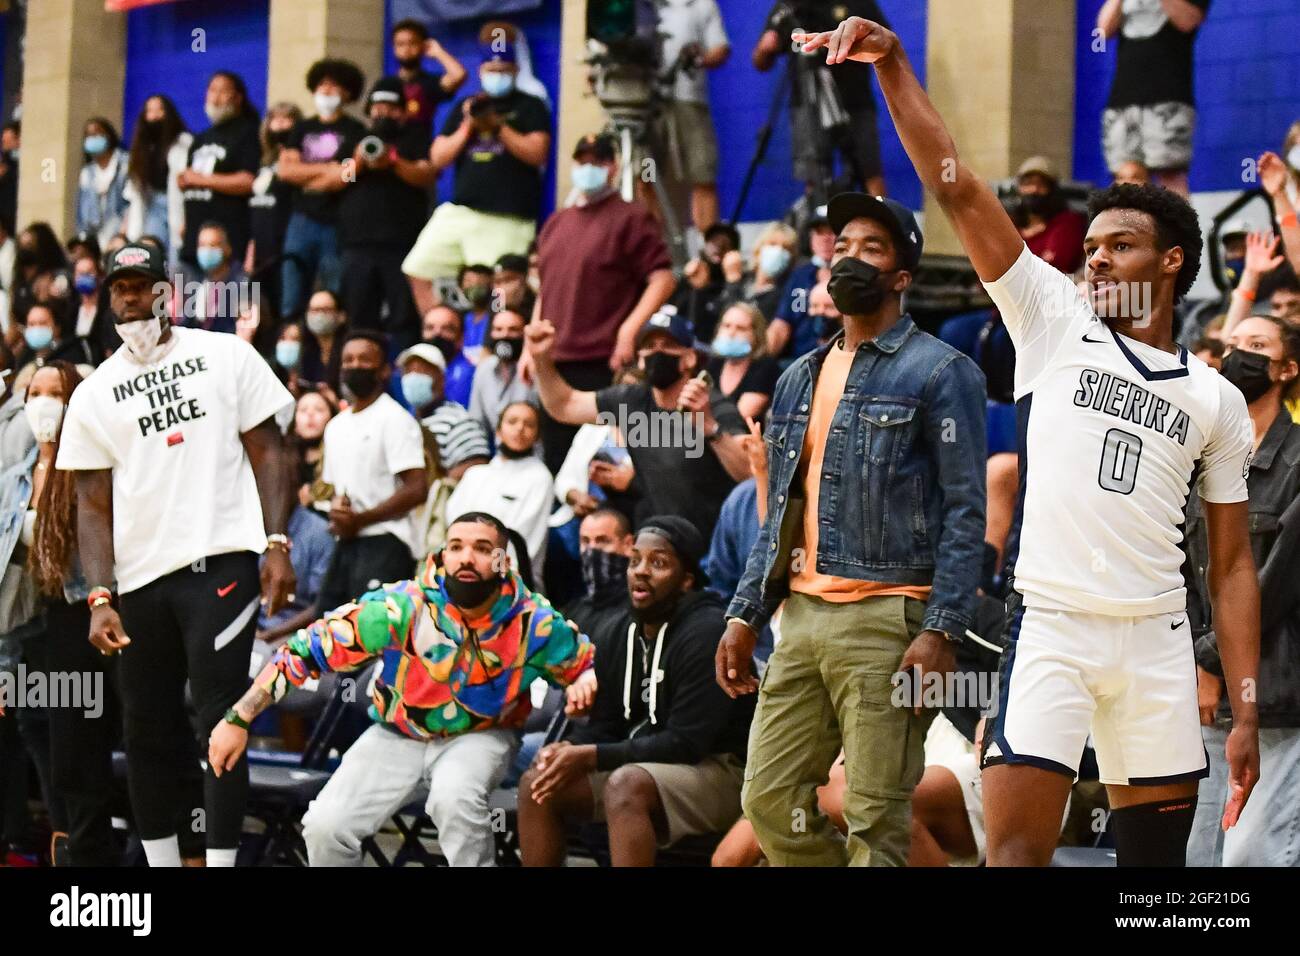 Sierra Canyon Trailblazers guard Bronny James (0) shoots the ball in front  of his father, LeBron James and Drake during the 2021 CIF Southern Section  Stock Photo - Alamy